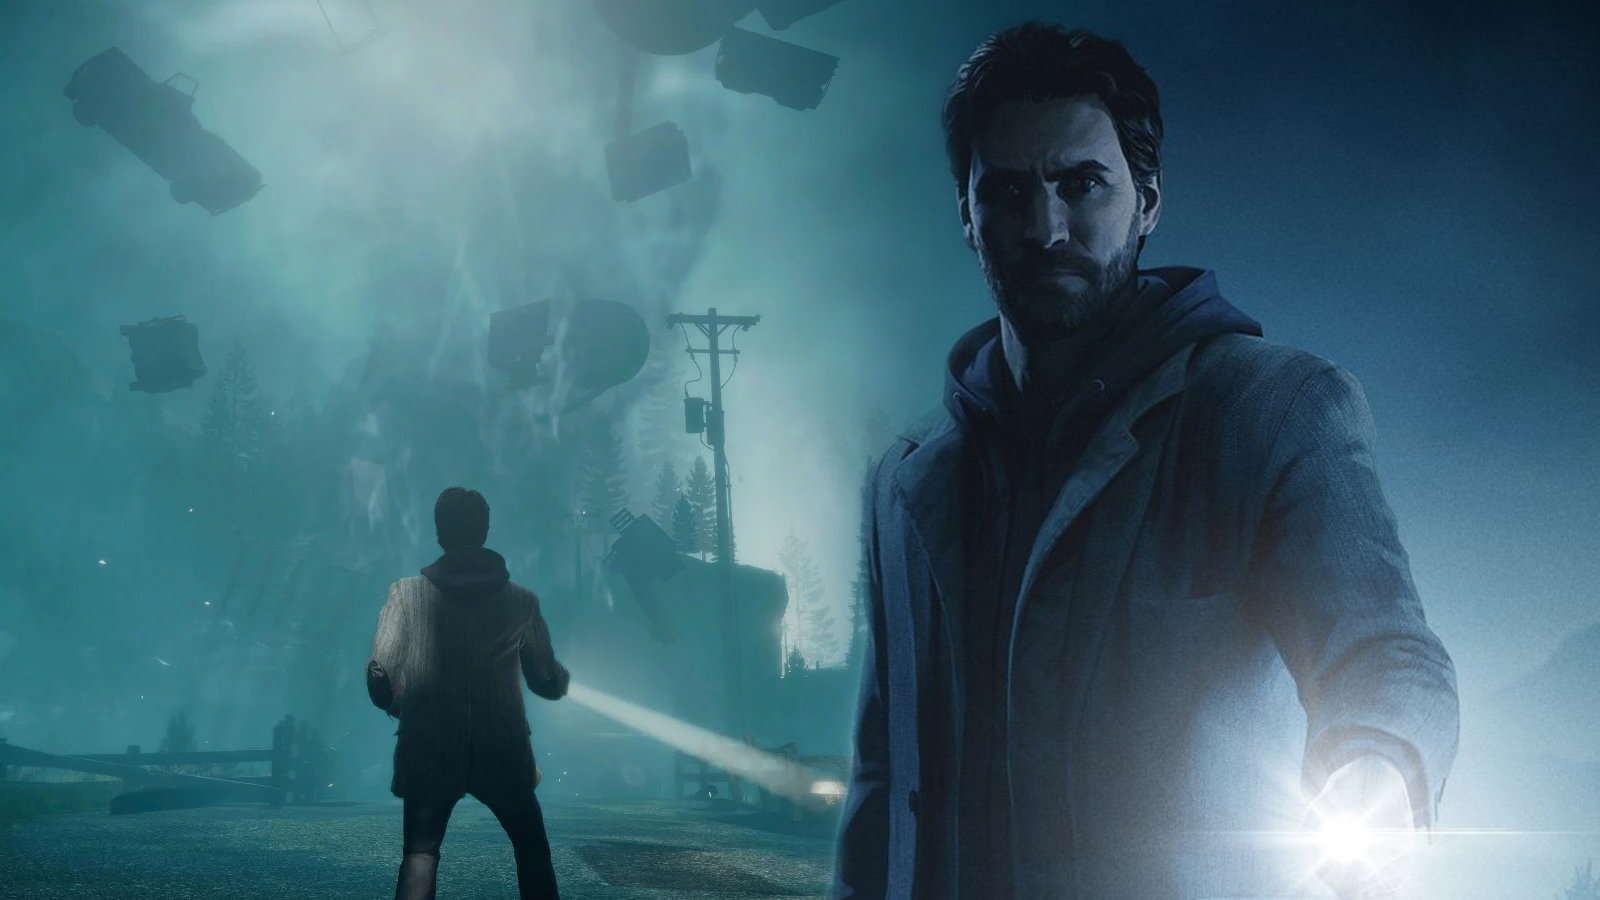 Alan Wake Remastered On Switch Looks Rough